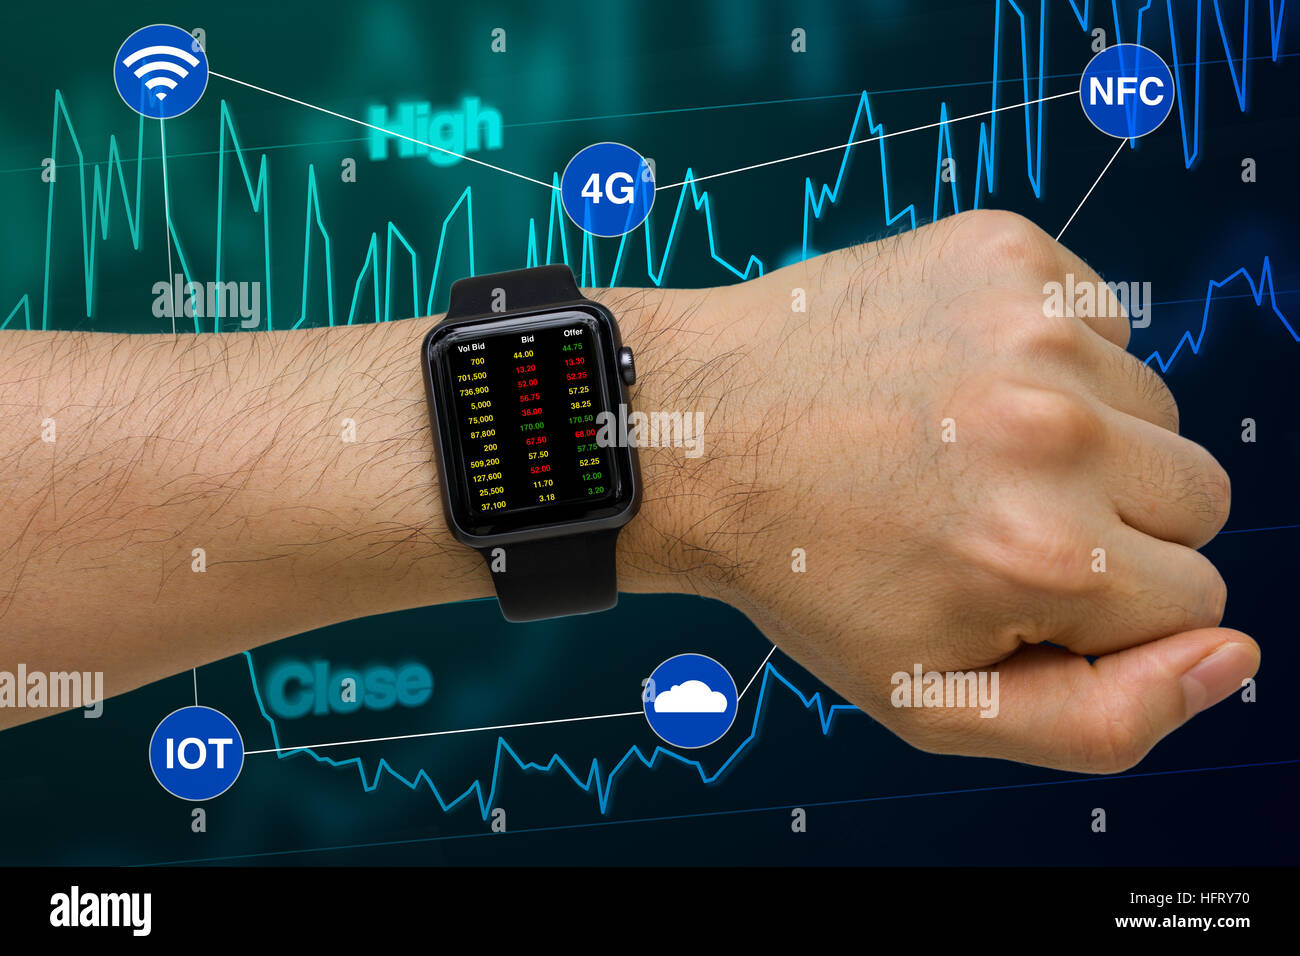 Investment business concept illustrated by smartwatch showing stock price via internet. Stock Photo